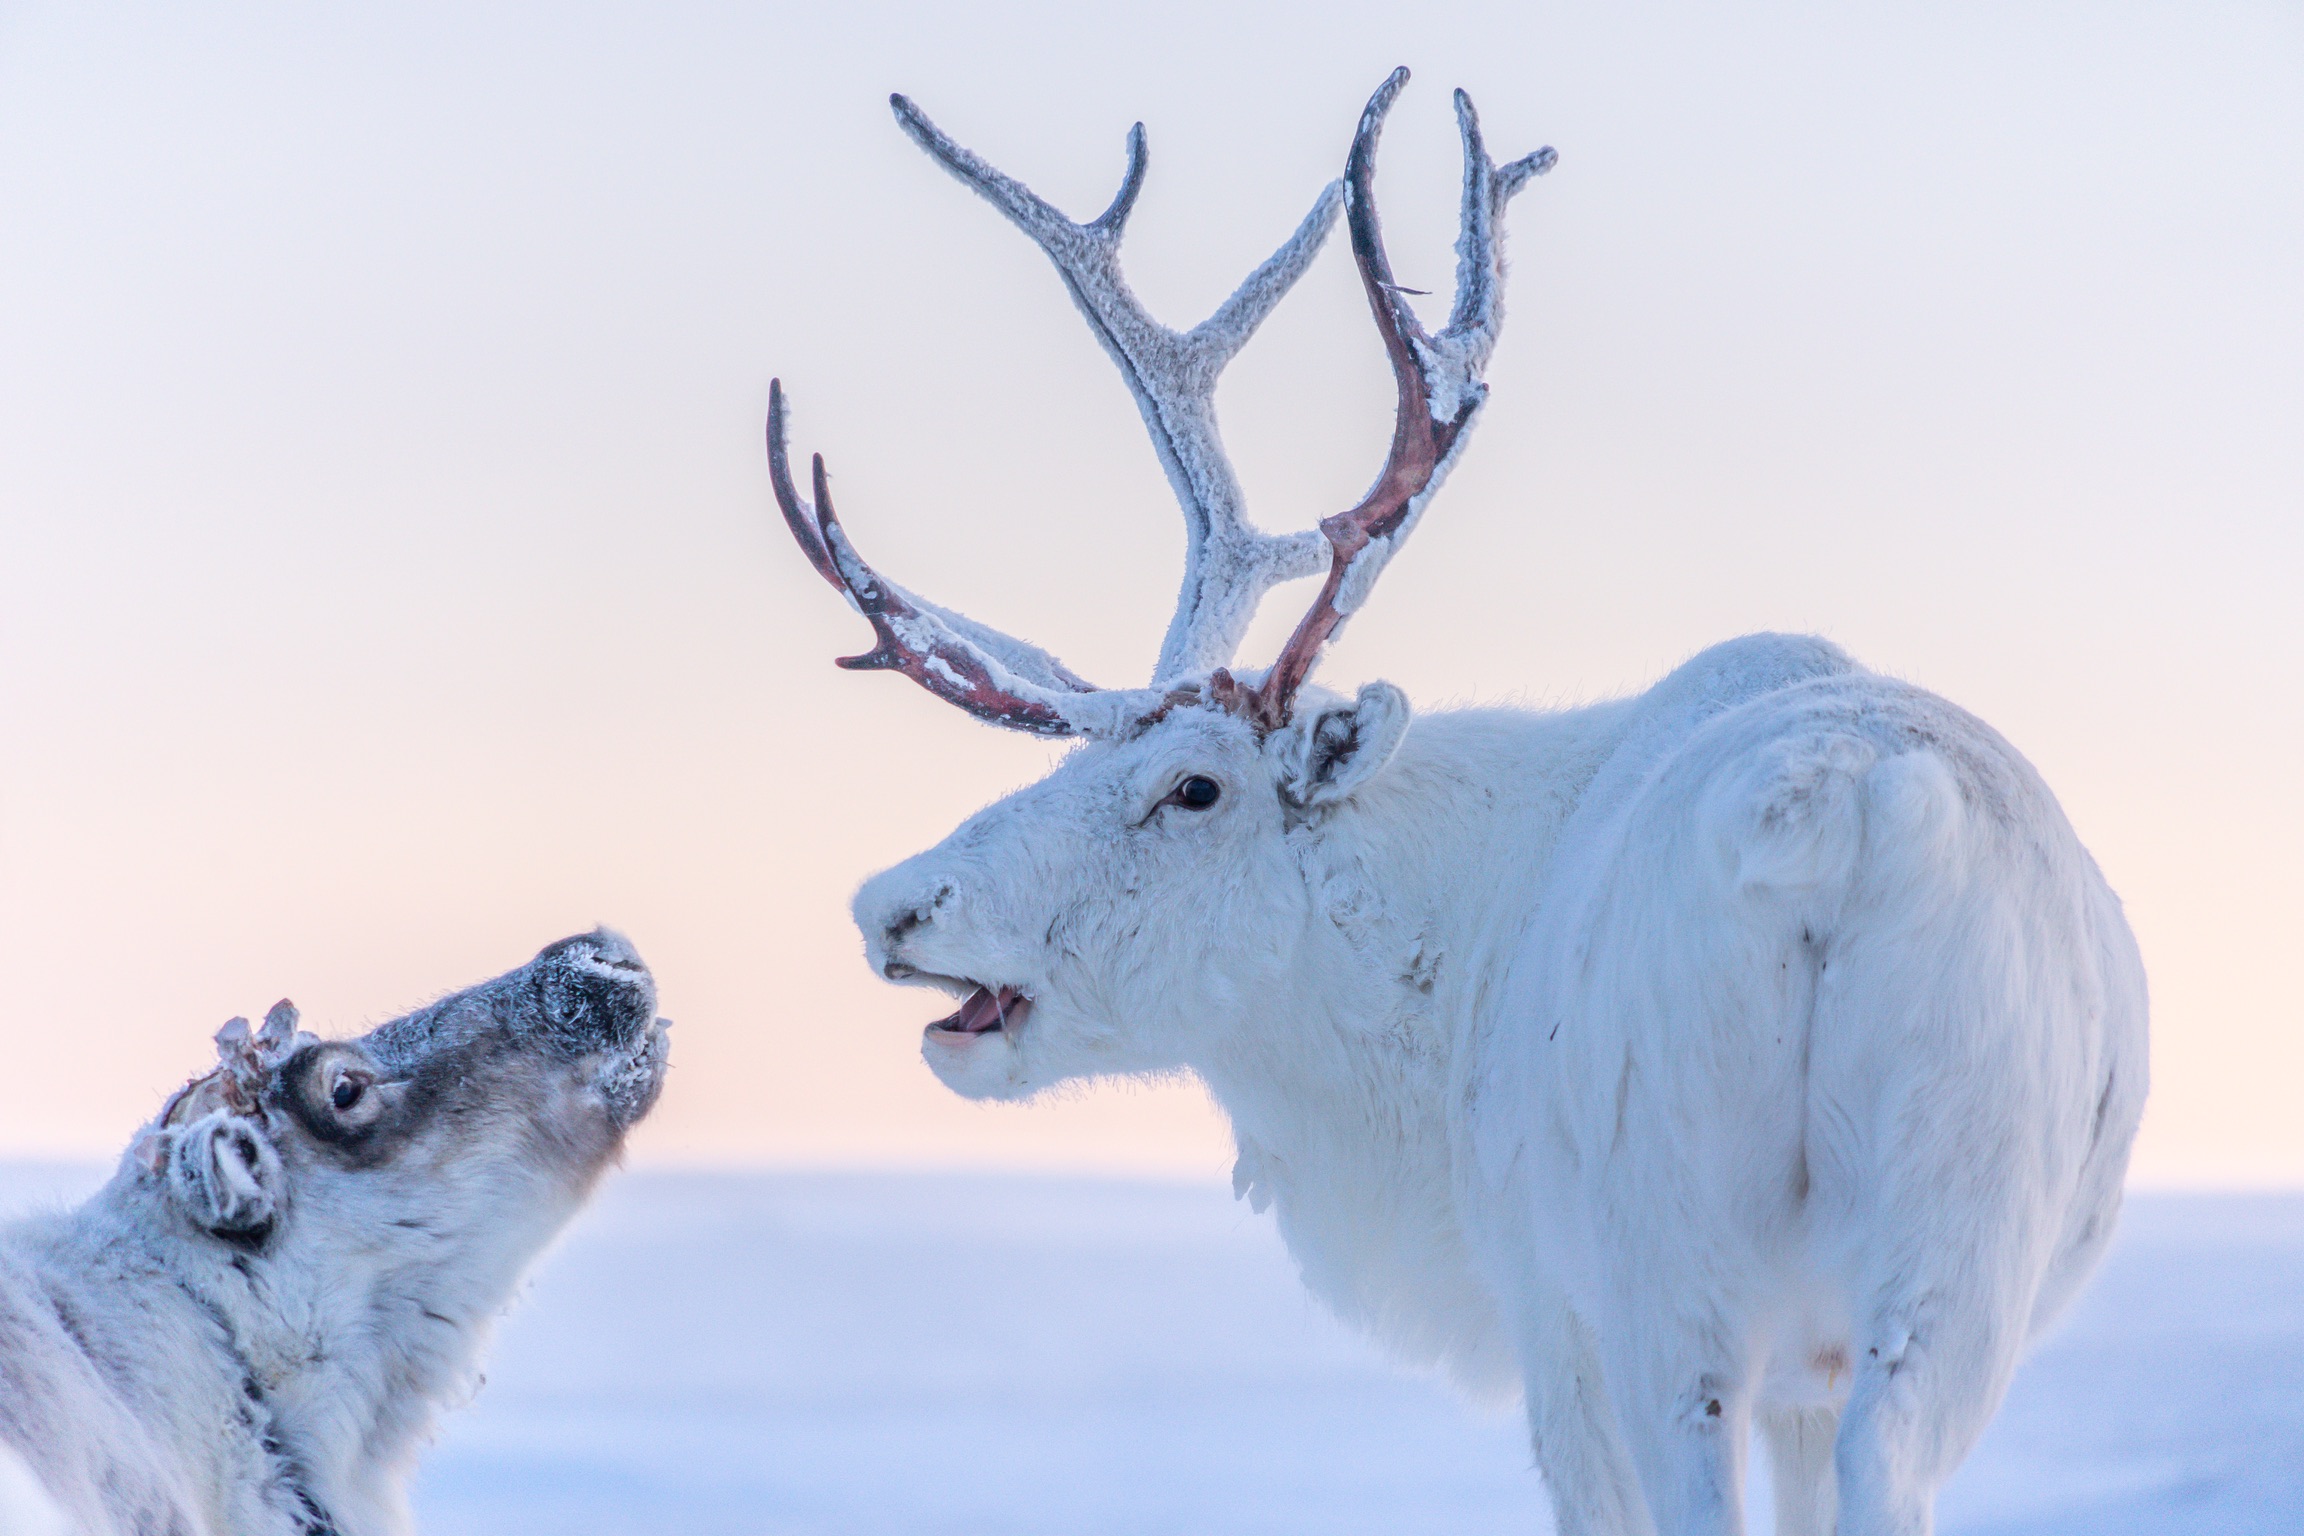 A white reindeer with antlers appears to be talking to a white reindeer with a grey face and no antlers. The second reindeer appears to be paint rapt attention.